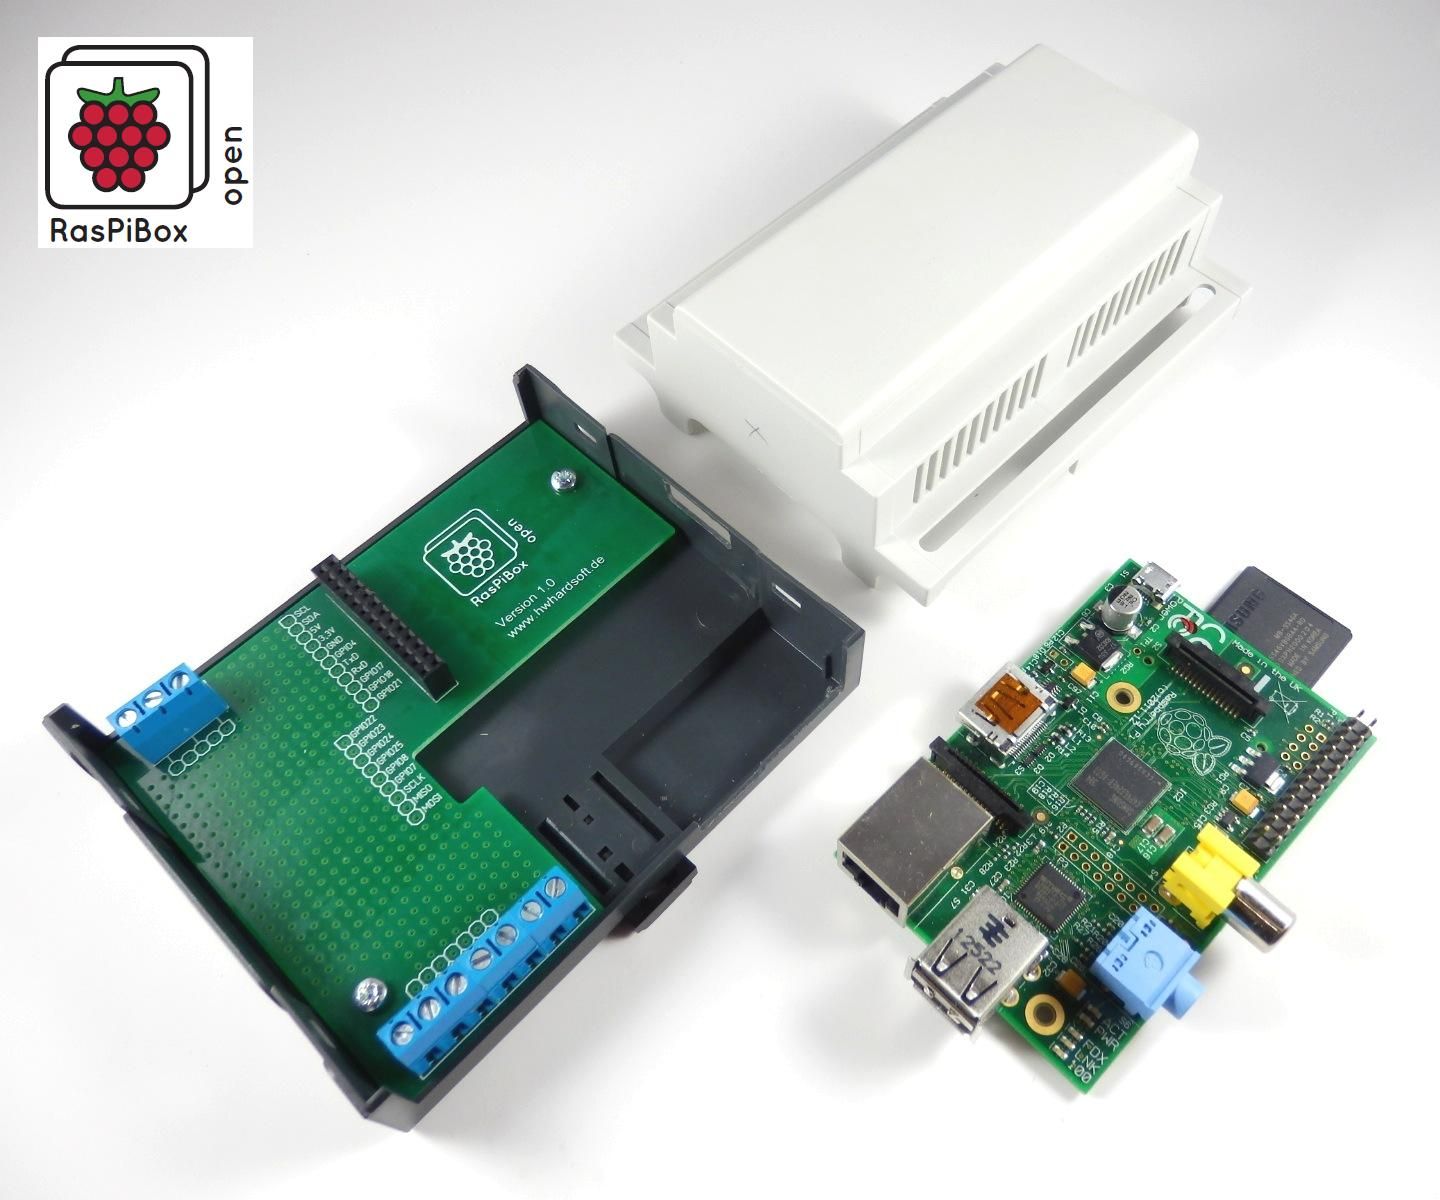 How to Install the Raspberry Pi in a Control Cabinet